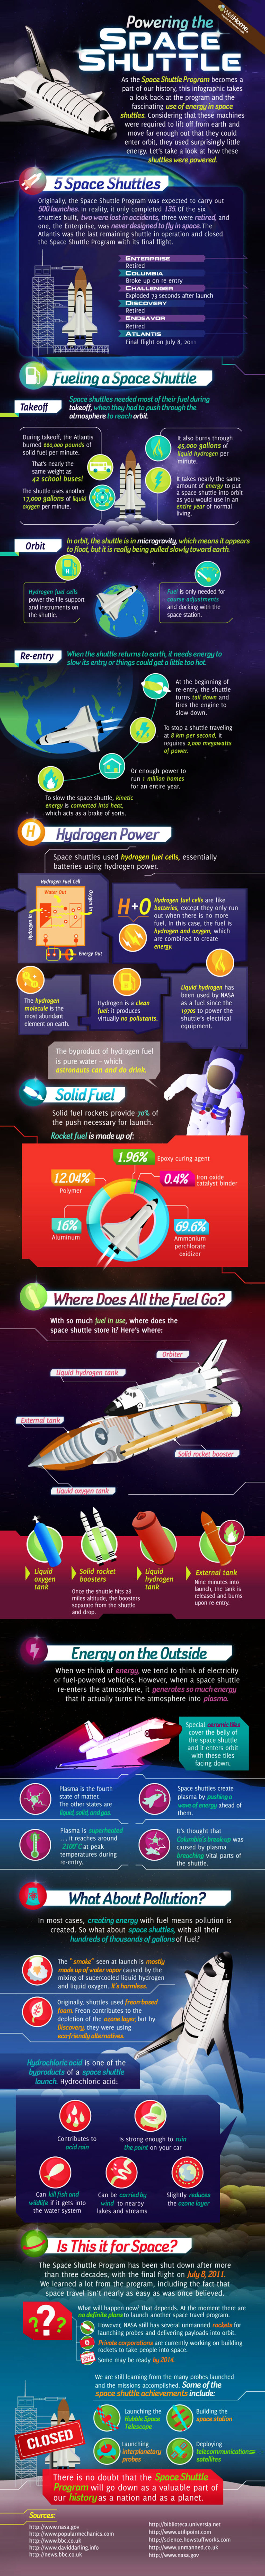 Powering the Space Shuttle Infographic